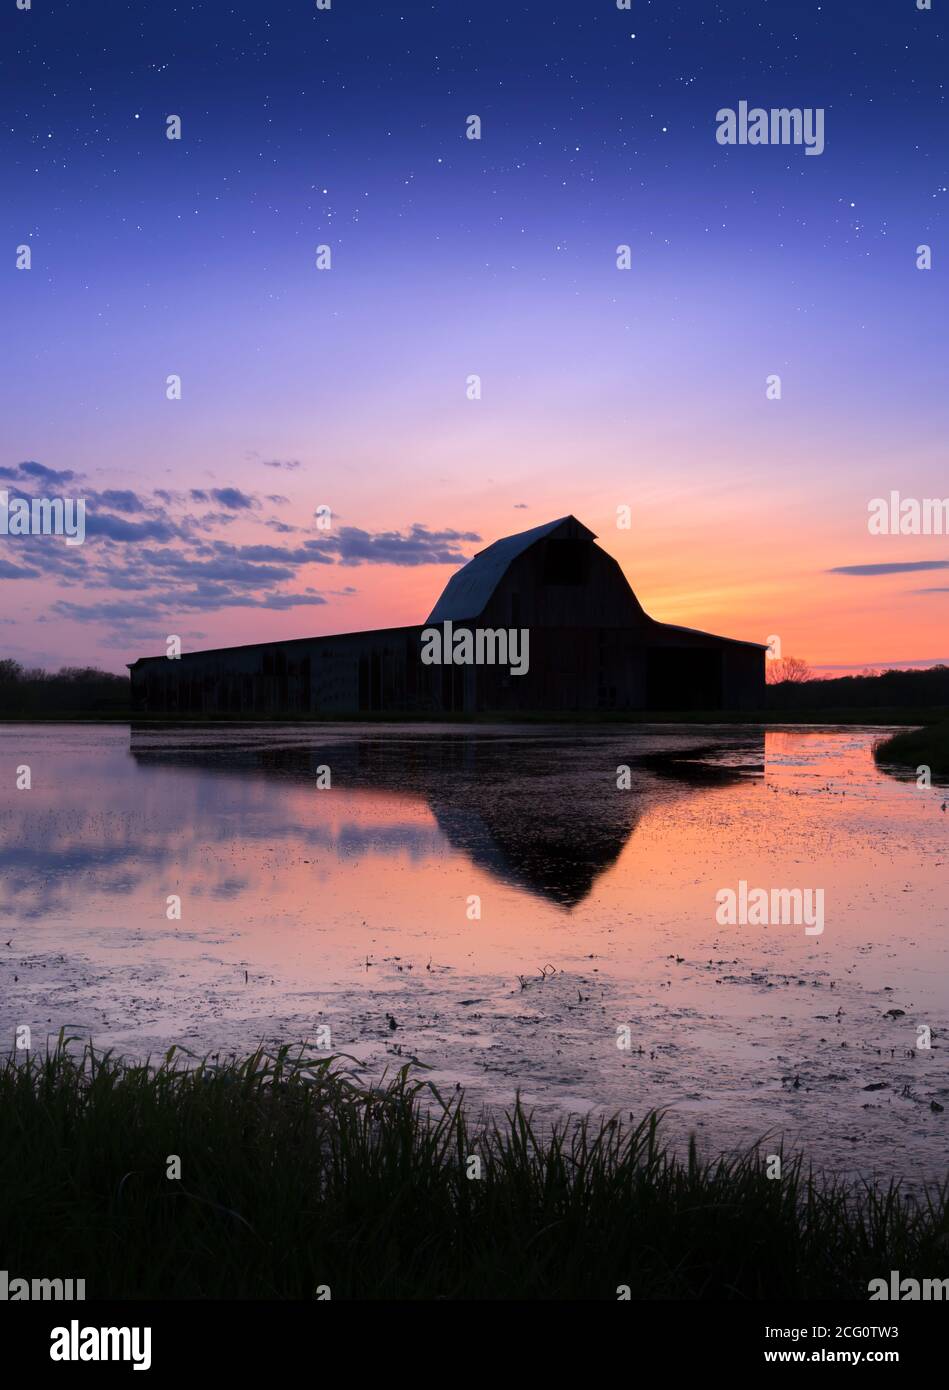 Old Barn and Sunset Reflected in Water Stock Photo